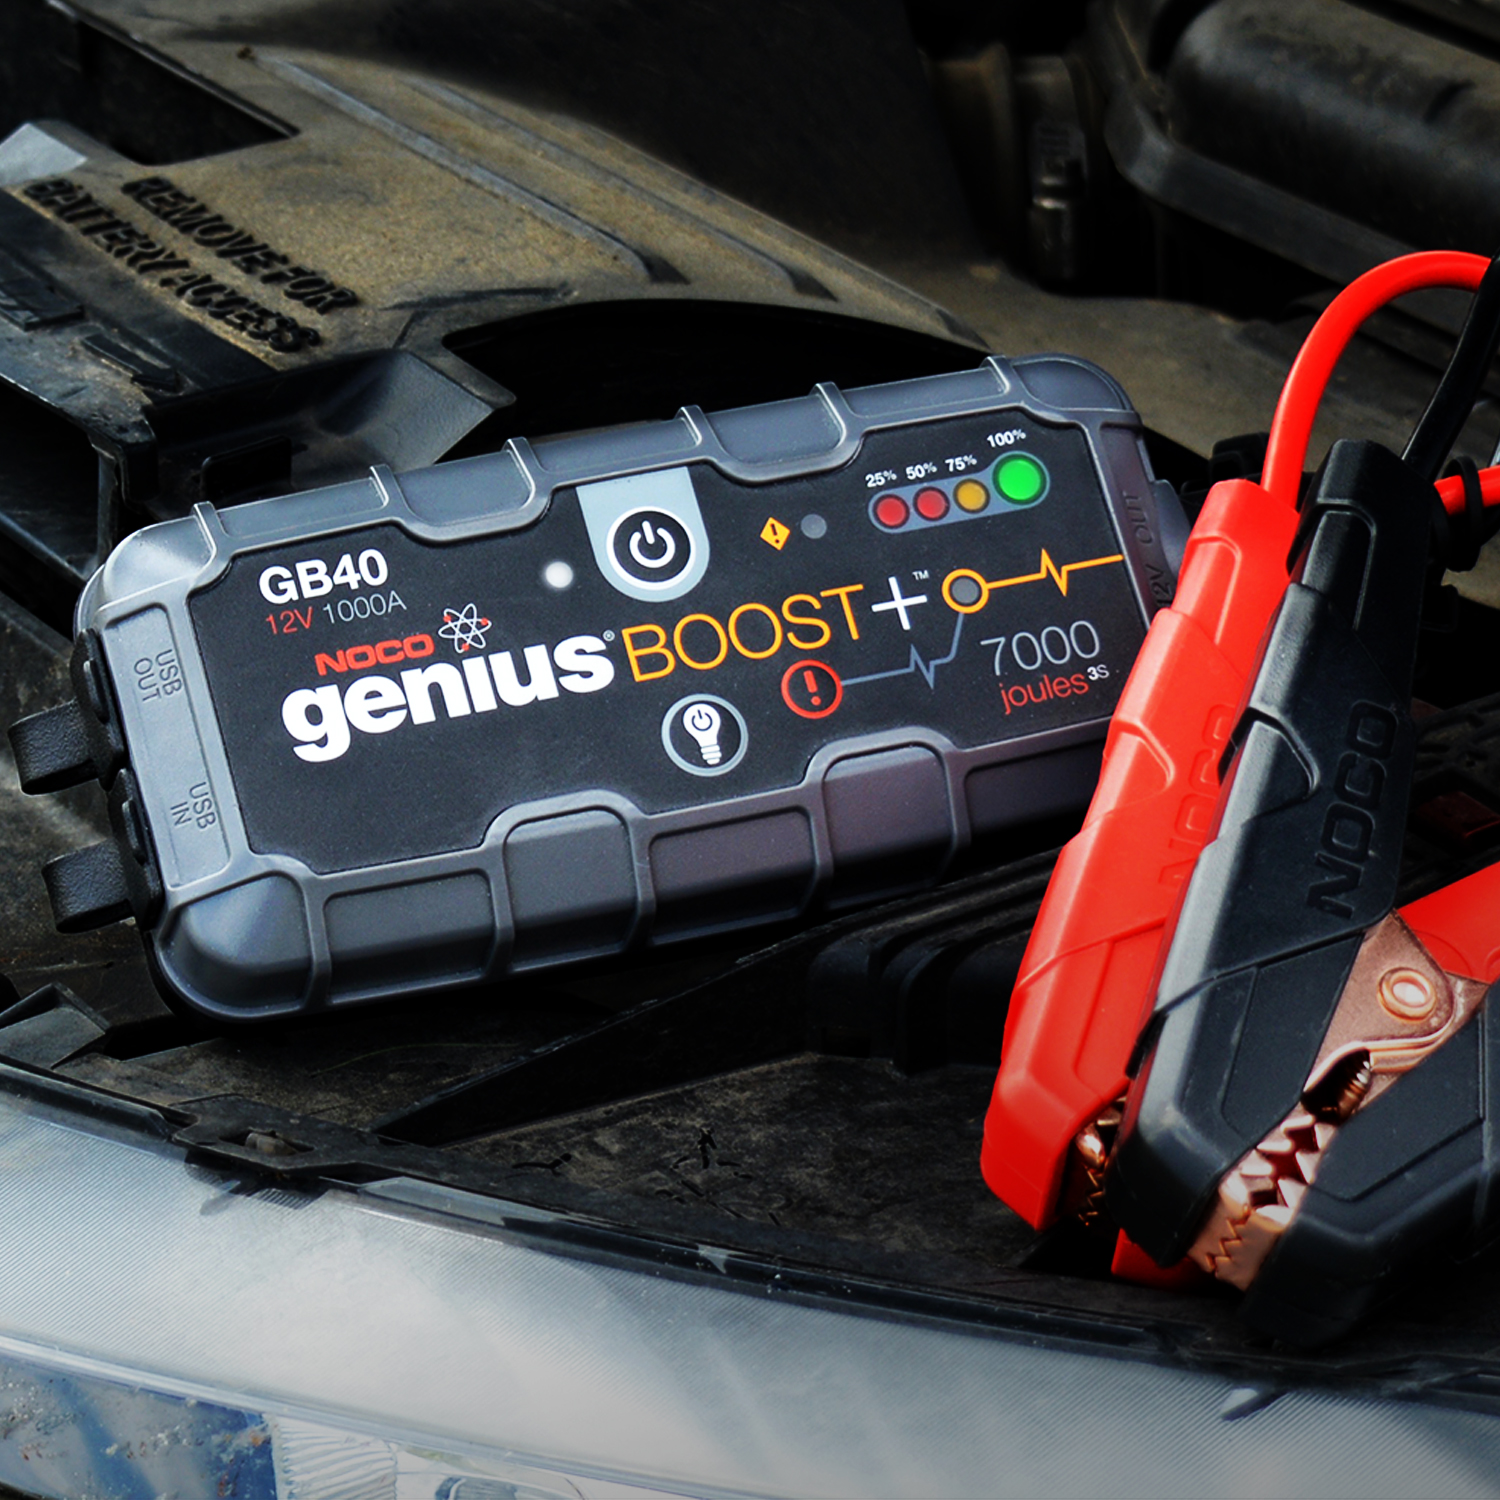 Can You Jump Start a Car With a Lithium Battery?